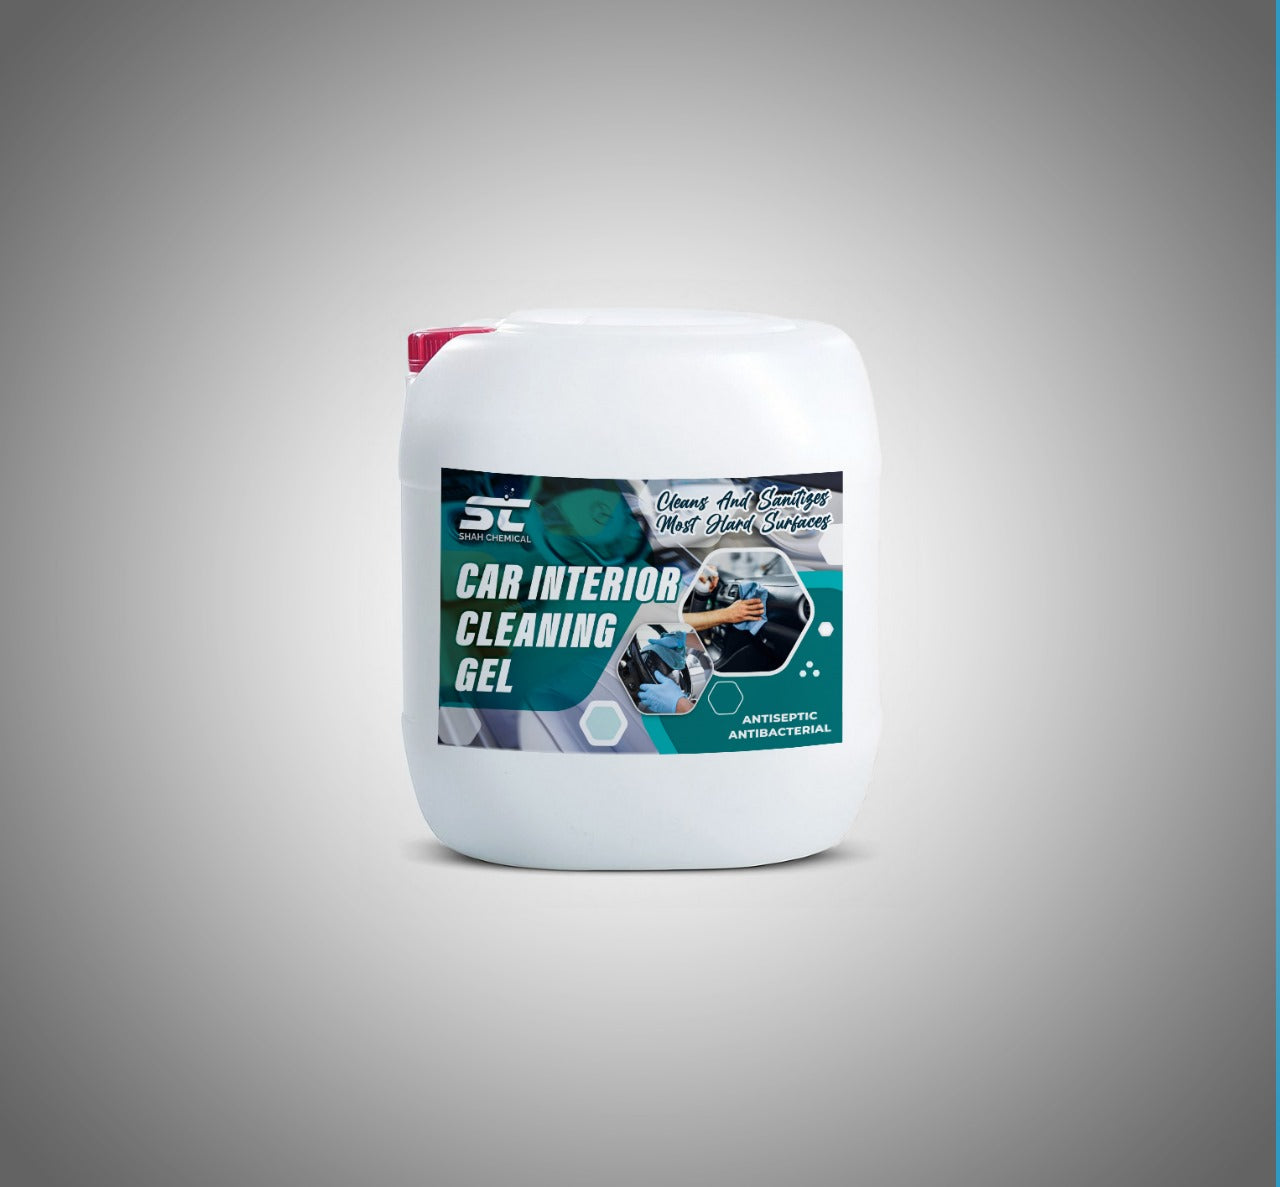 Car Interior Cleaning Gel  - 20 litre